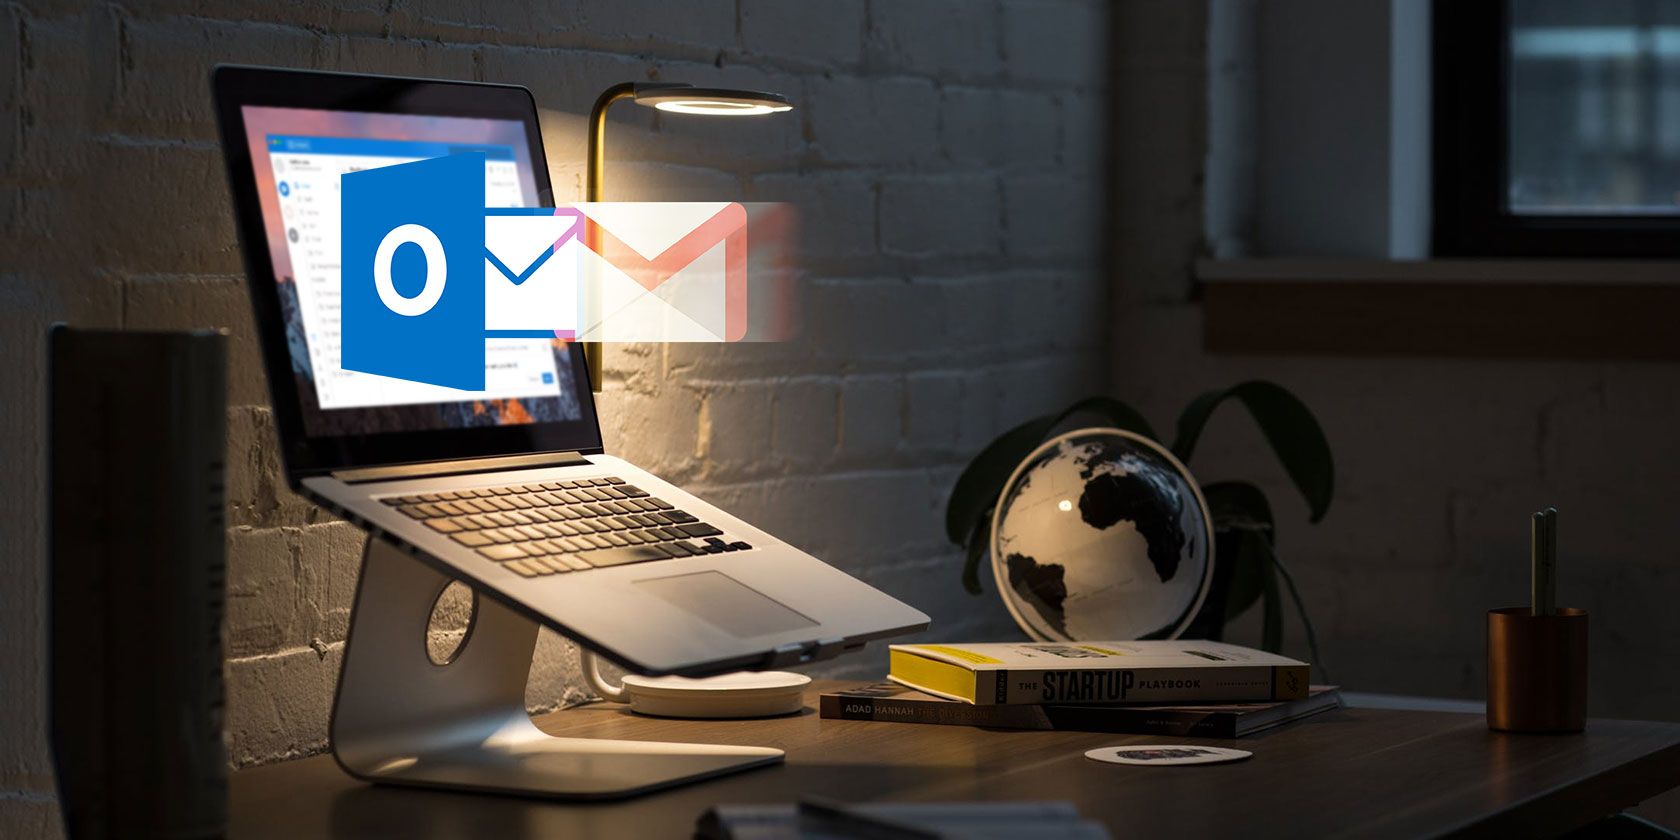 adding a gmail account to outlook for mac